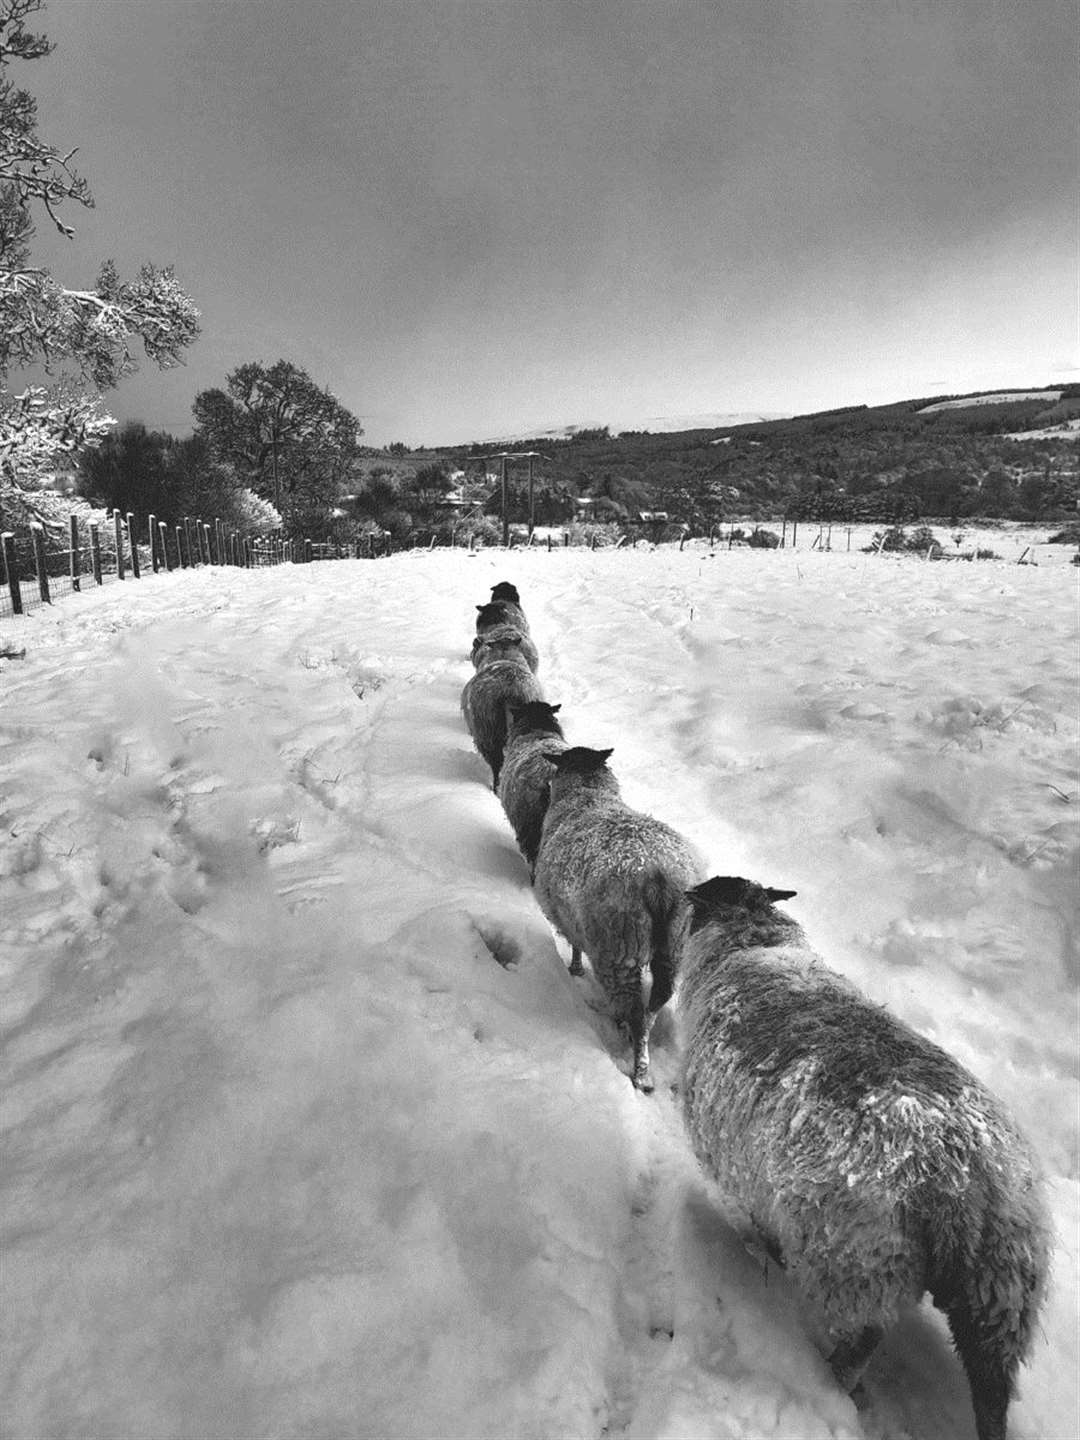 Jan Charge's Pathfinder, which came second in the monochrome category, told a winter story of farming and the common sense approach of sheep. Like all good monochrome images, it had an excellent tonal range from black to white with details in the snow that can so easily be lost.